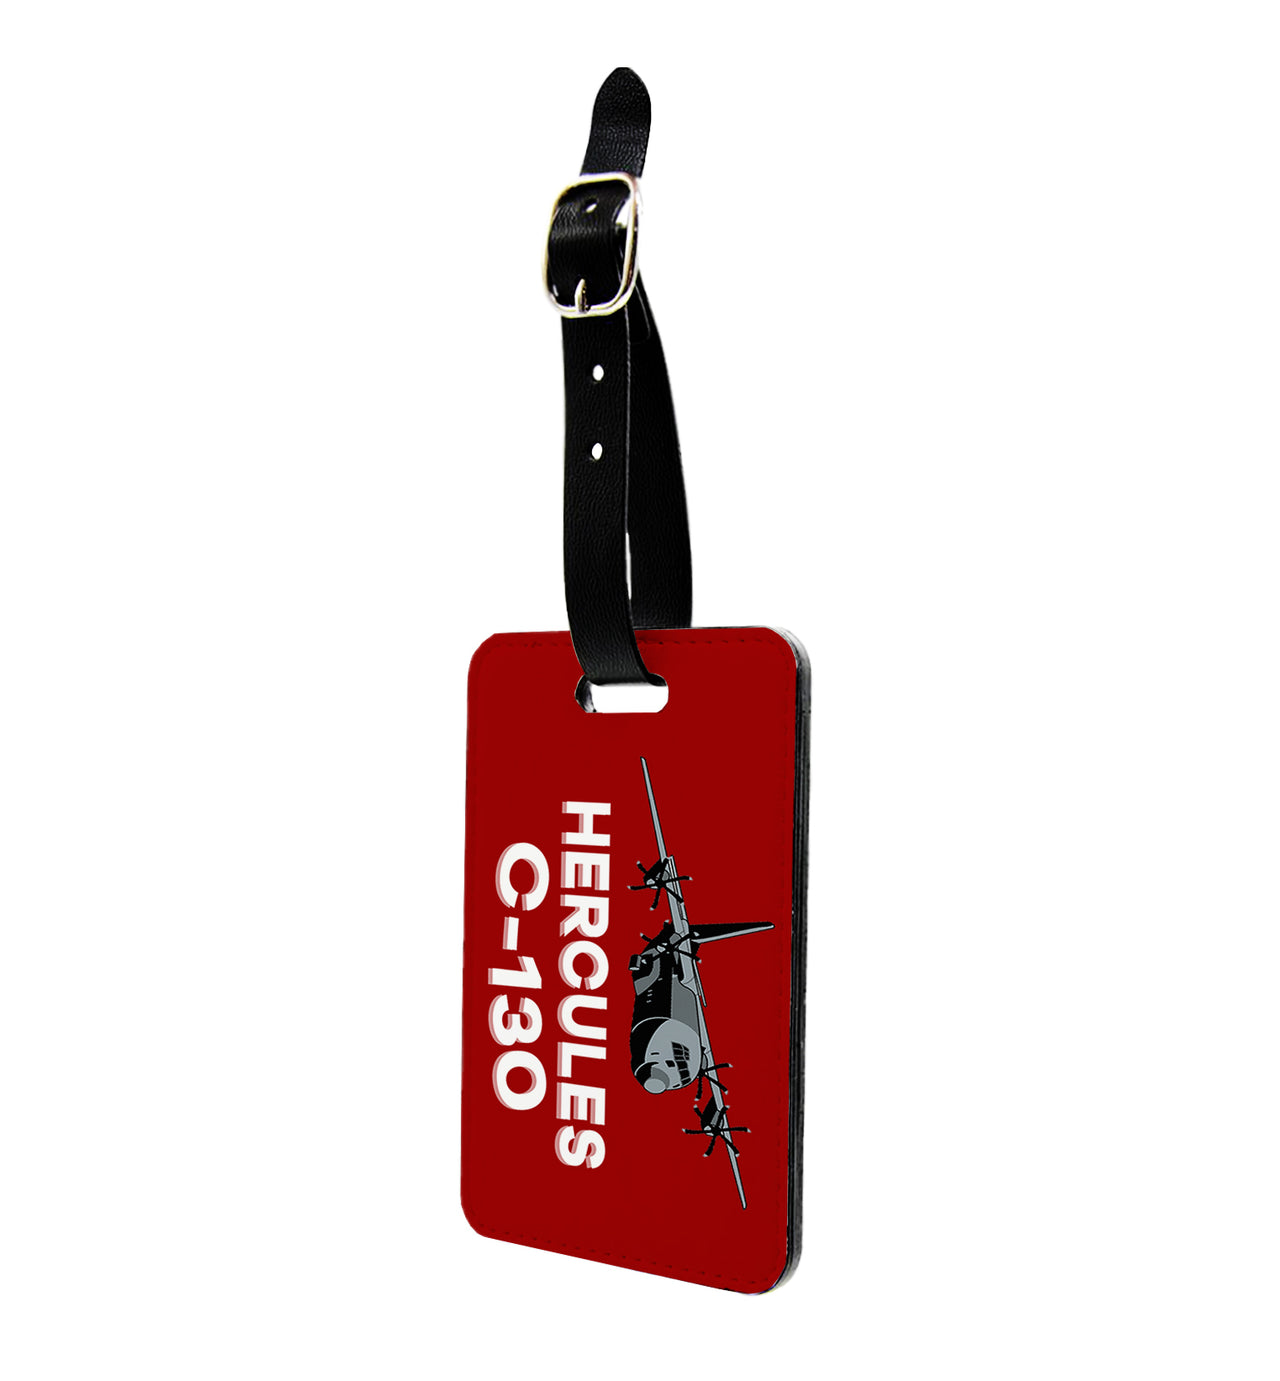 The Hercules C130 Designed Luggage Tag